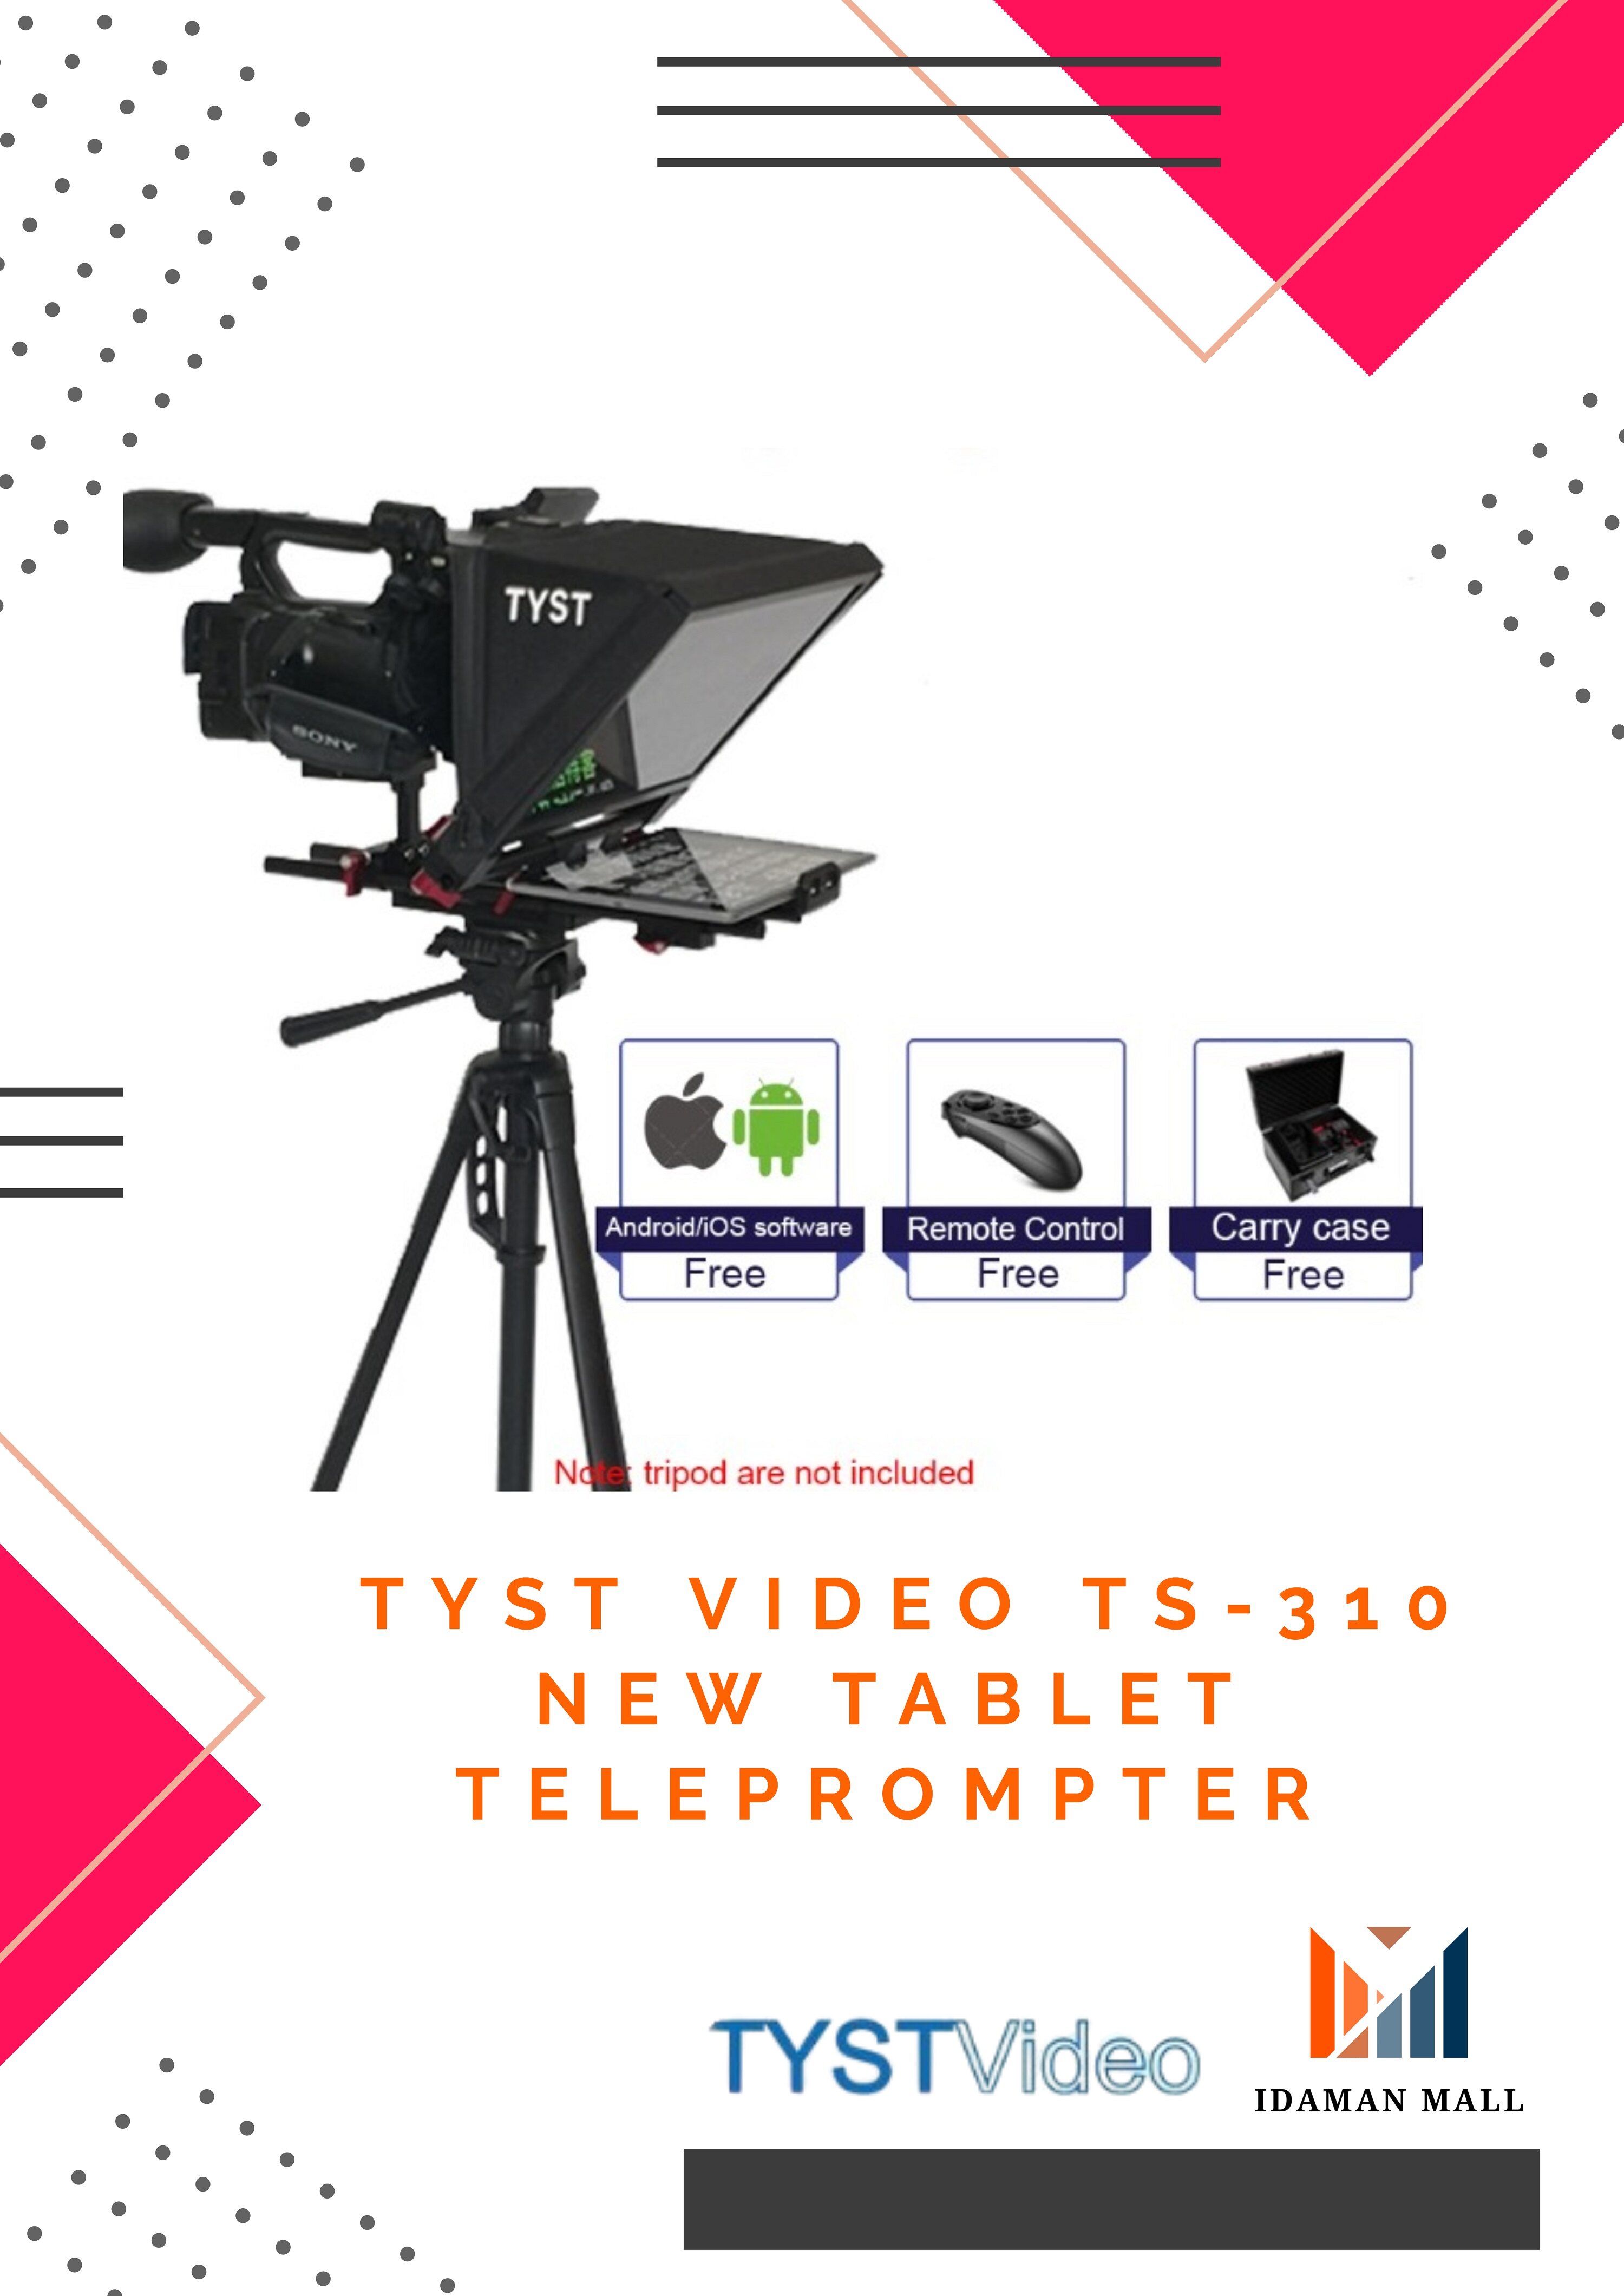 TYST Video TS-310 New Tablet Teleprompter Portable Small ipad Speech  Conference Teleprompter 12 Inch | Lazada